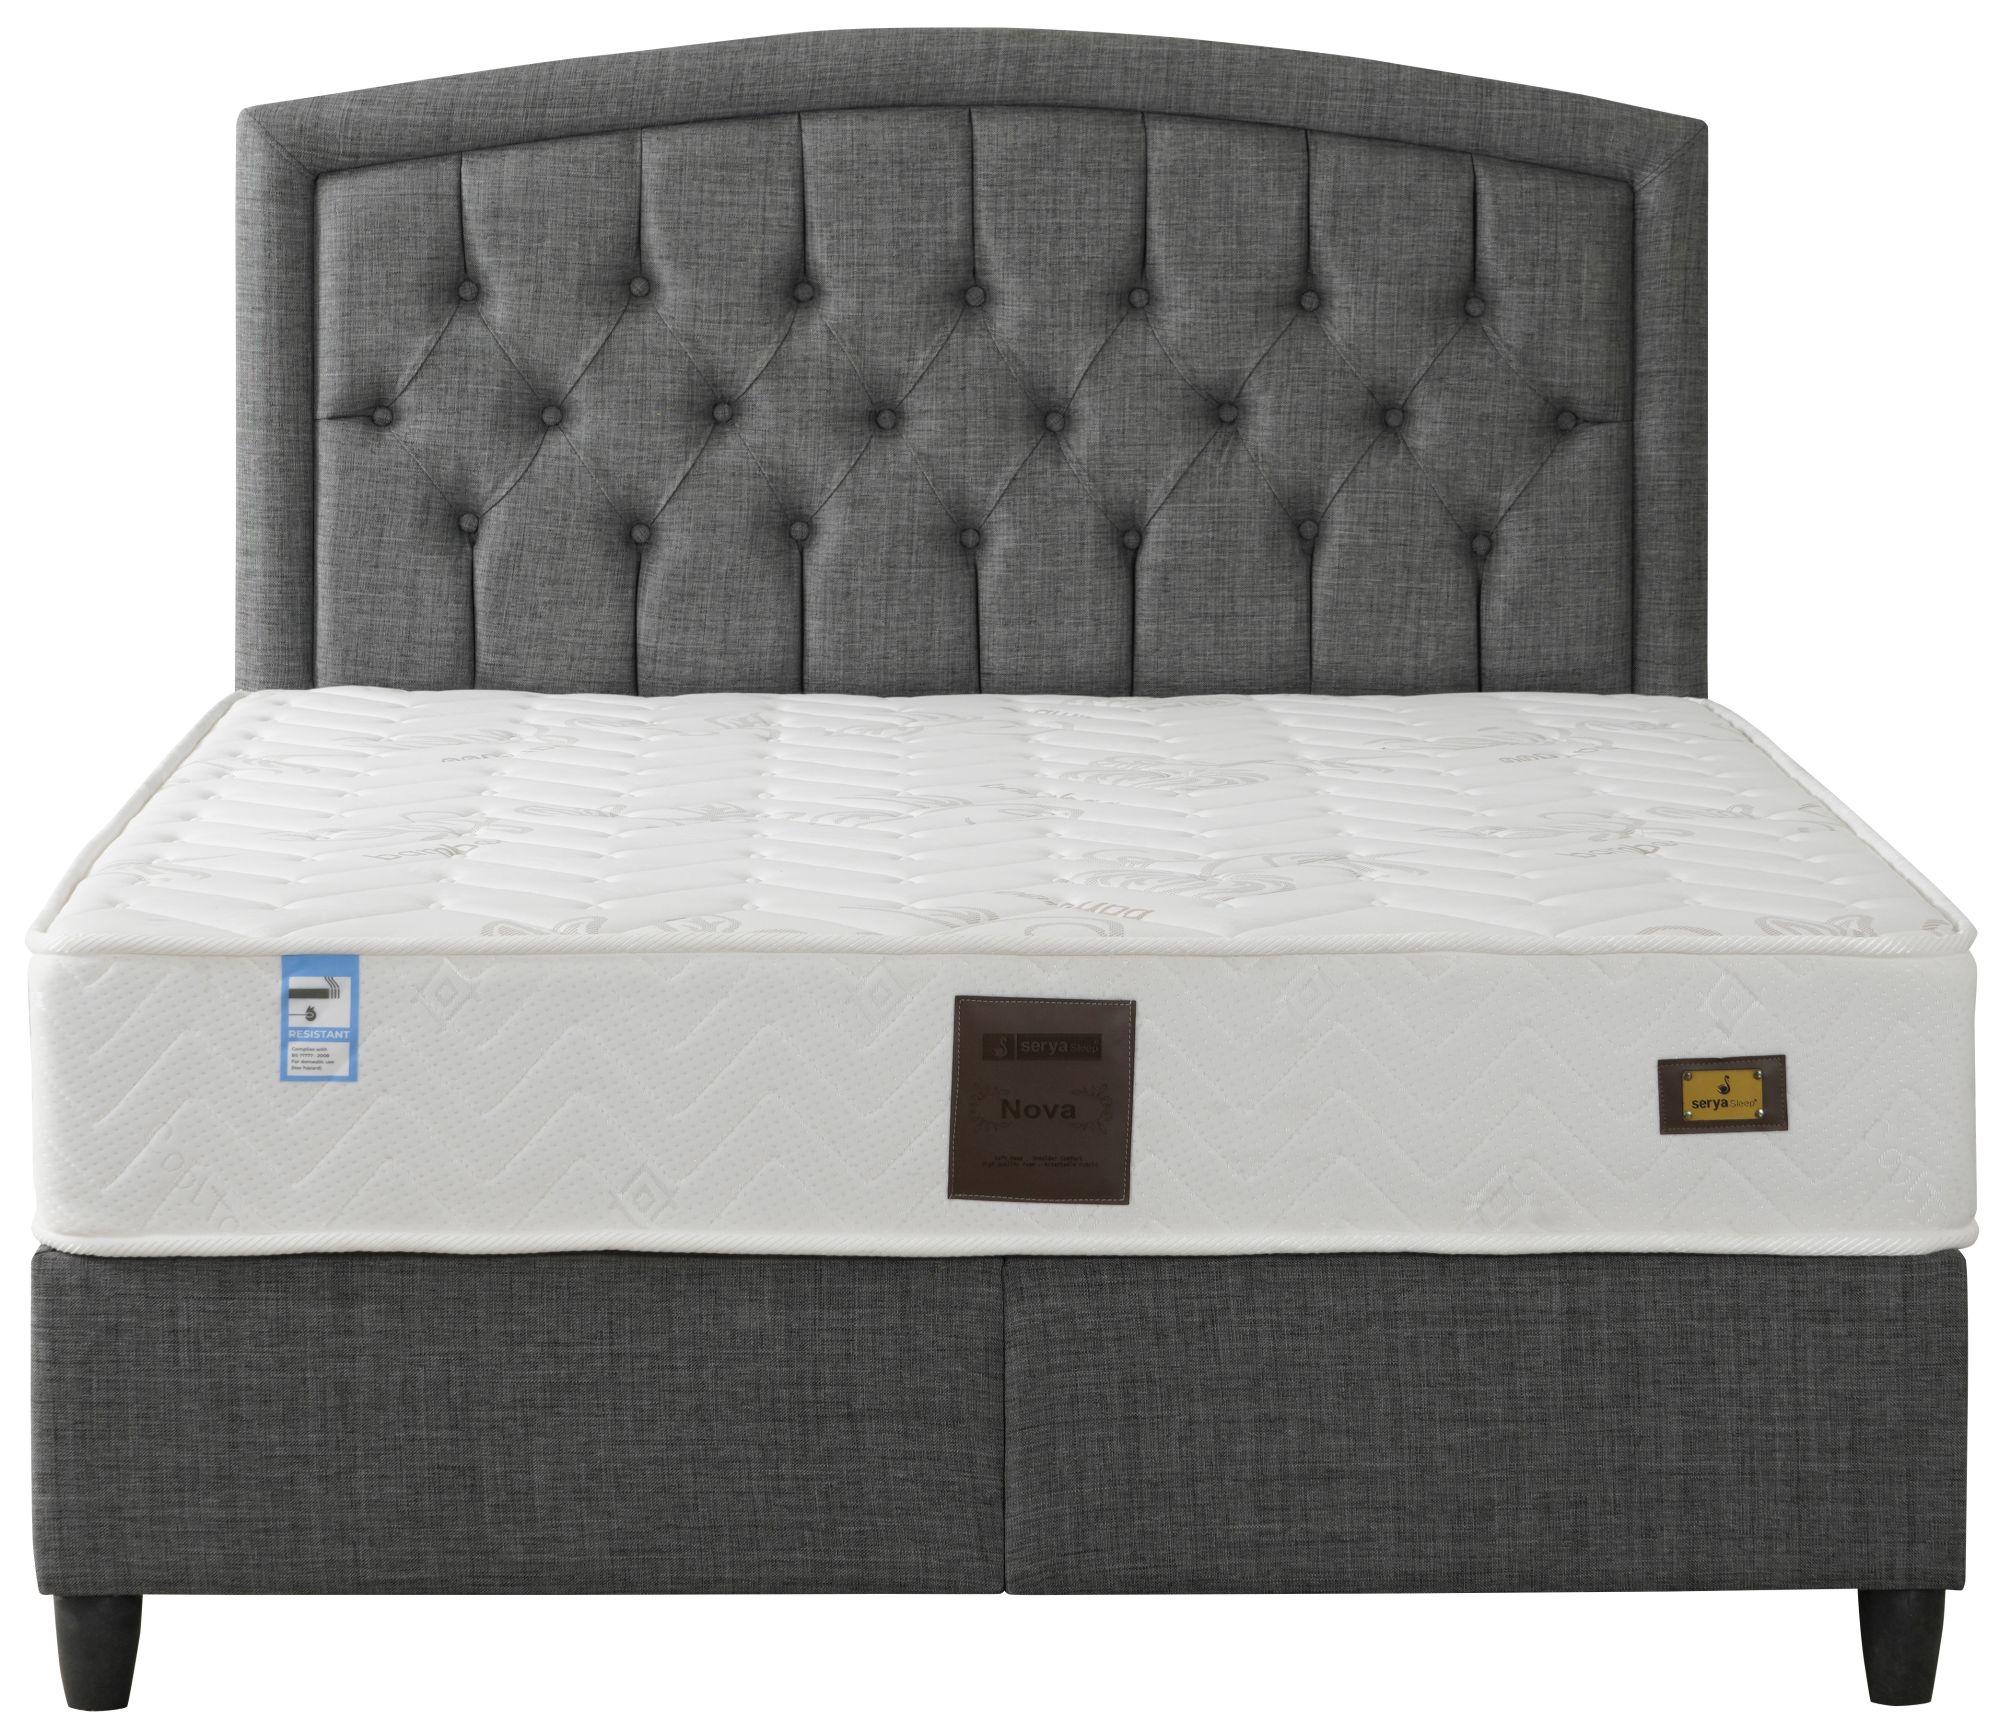 Charlotte Dark Grey Fabric Upholstered Ottoman Storage Bed - Comes in Double and King Size